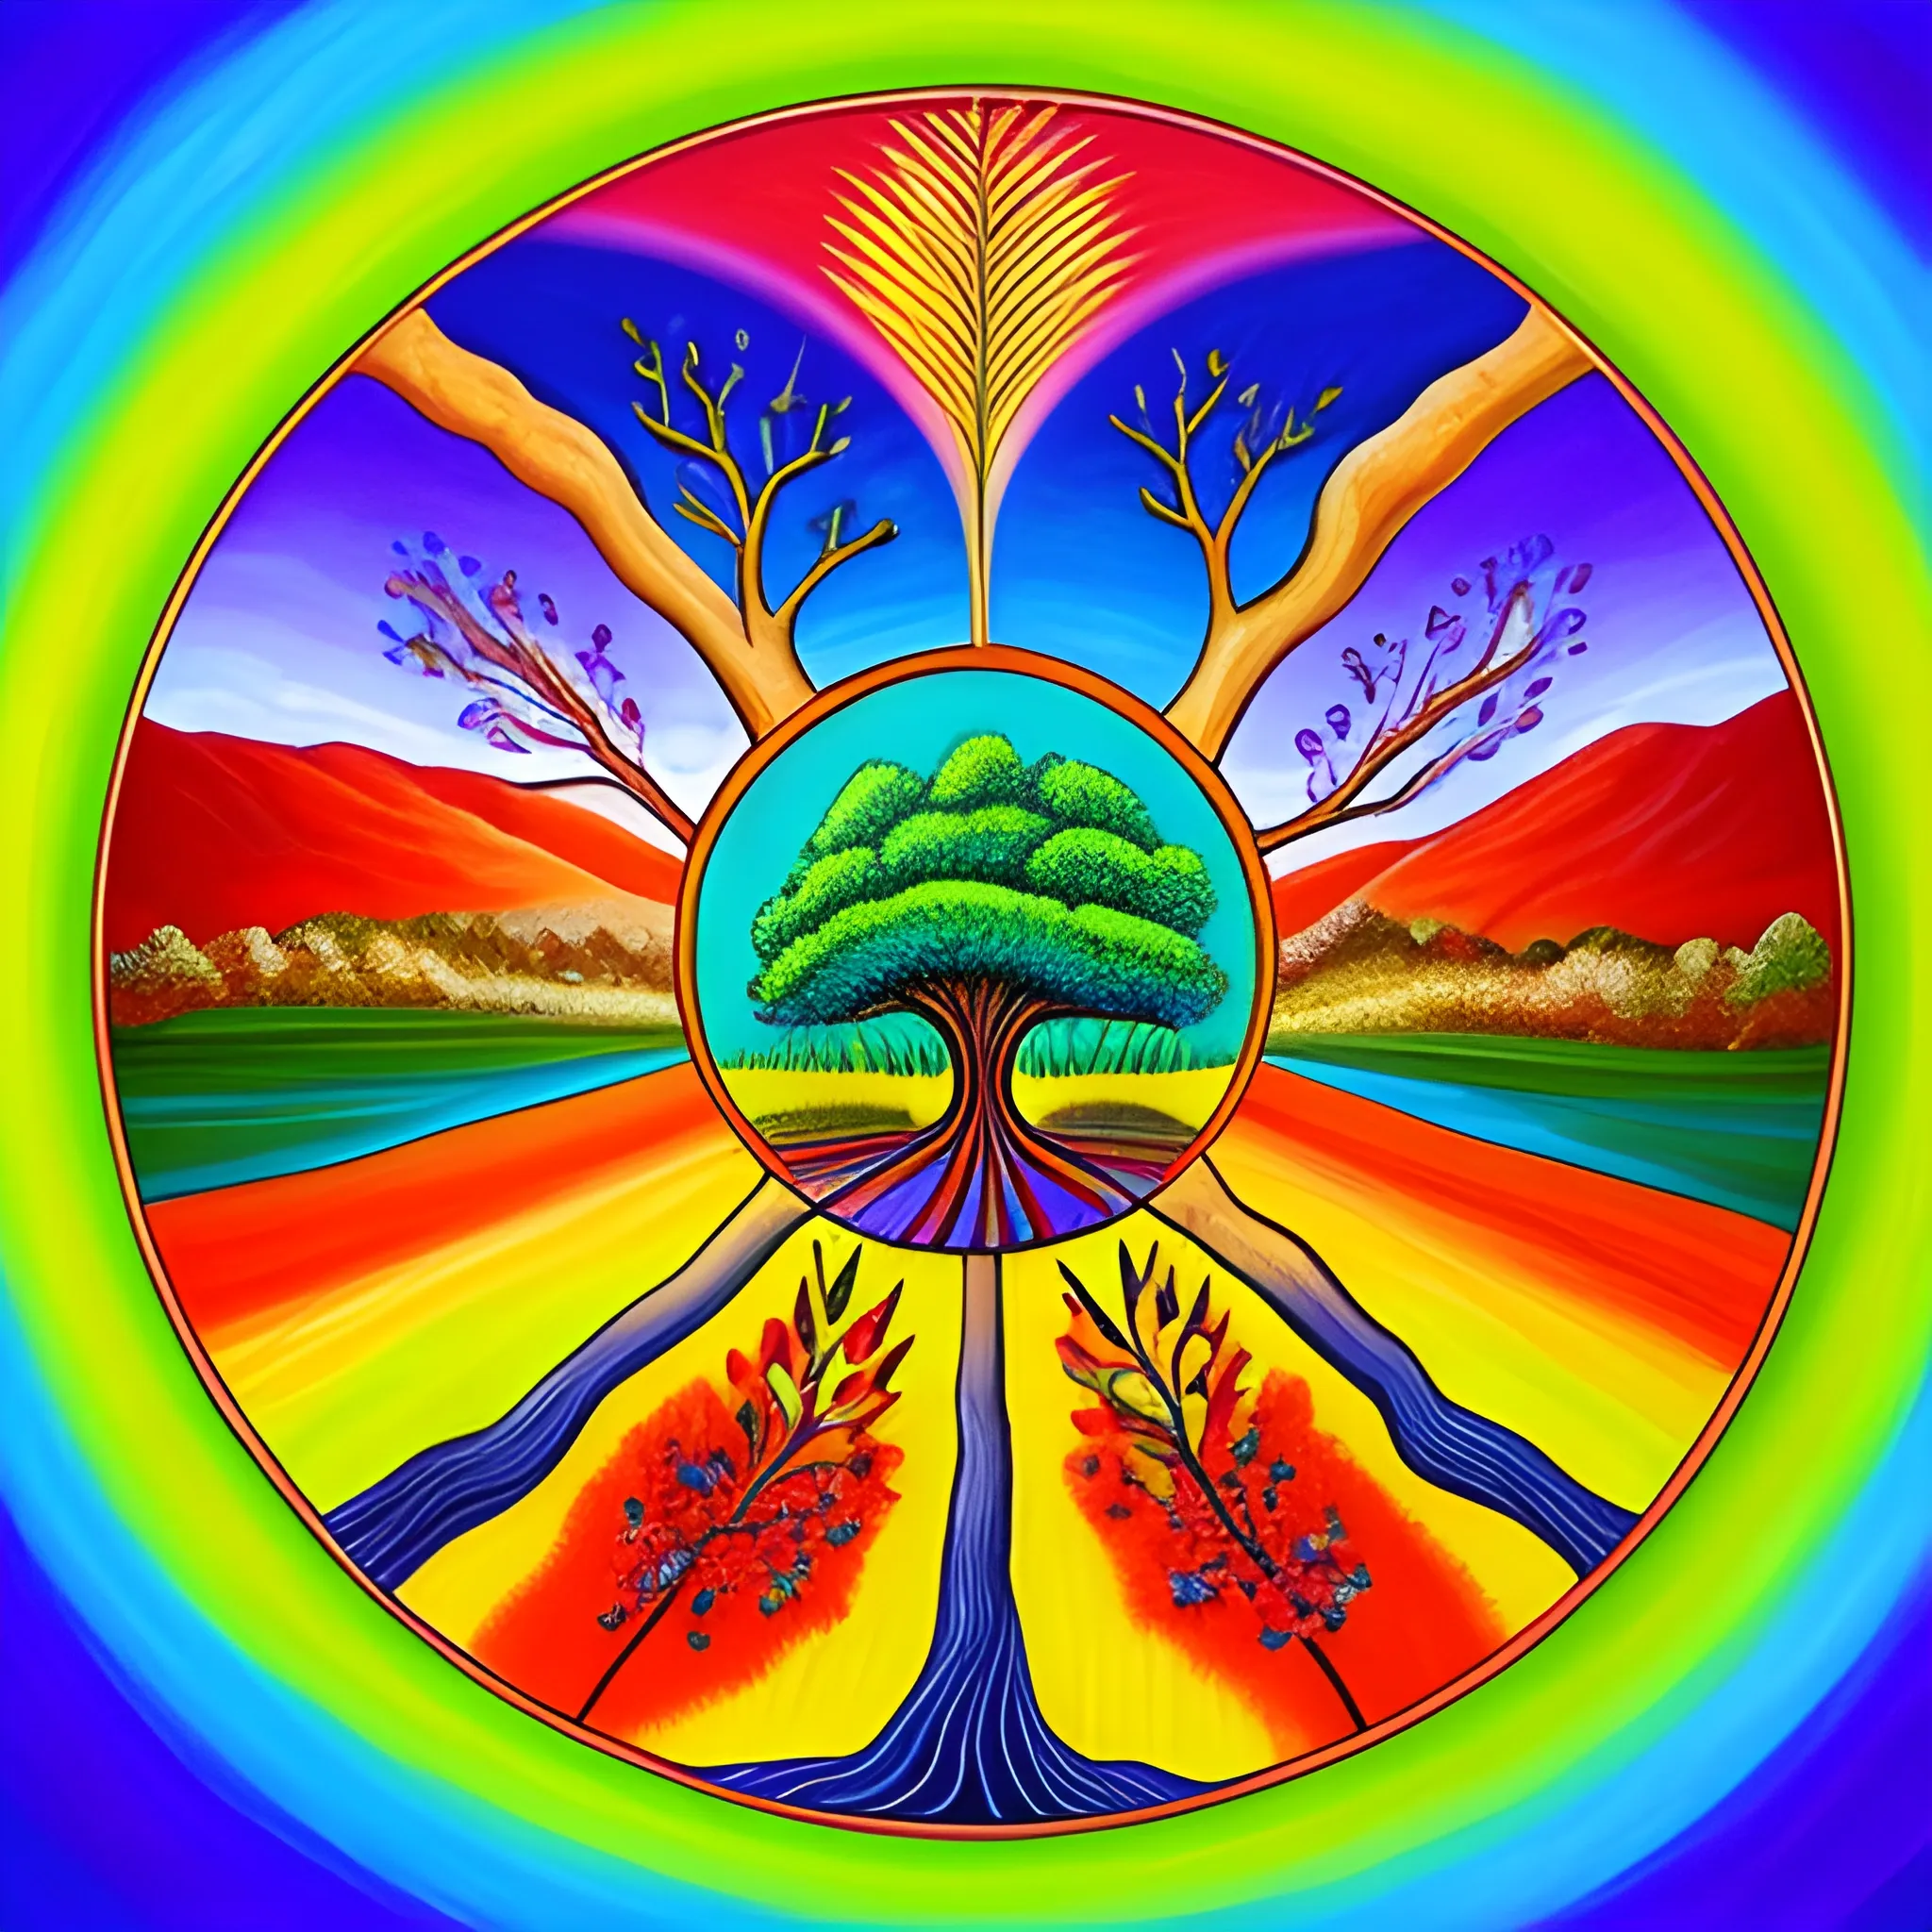 A vibrant painting showcasing the monthly-bearing fruit and healing properties of the trees of life on either side of the river. The artwork conveys the abundance and eternal blessings that await the nations in the new heaven and earth.